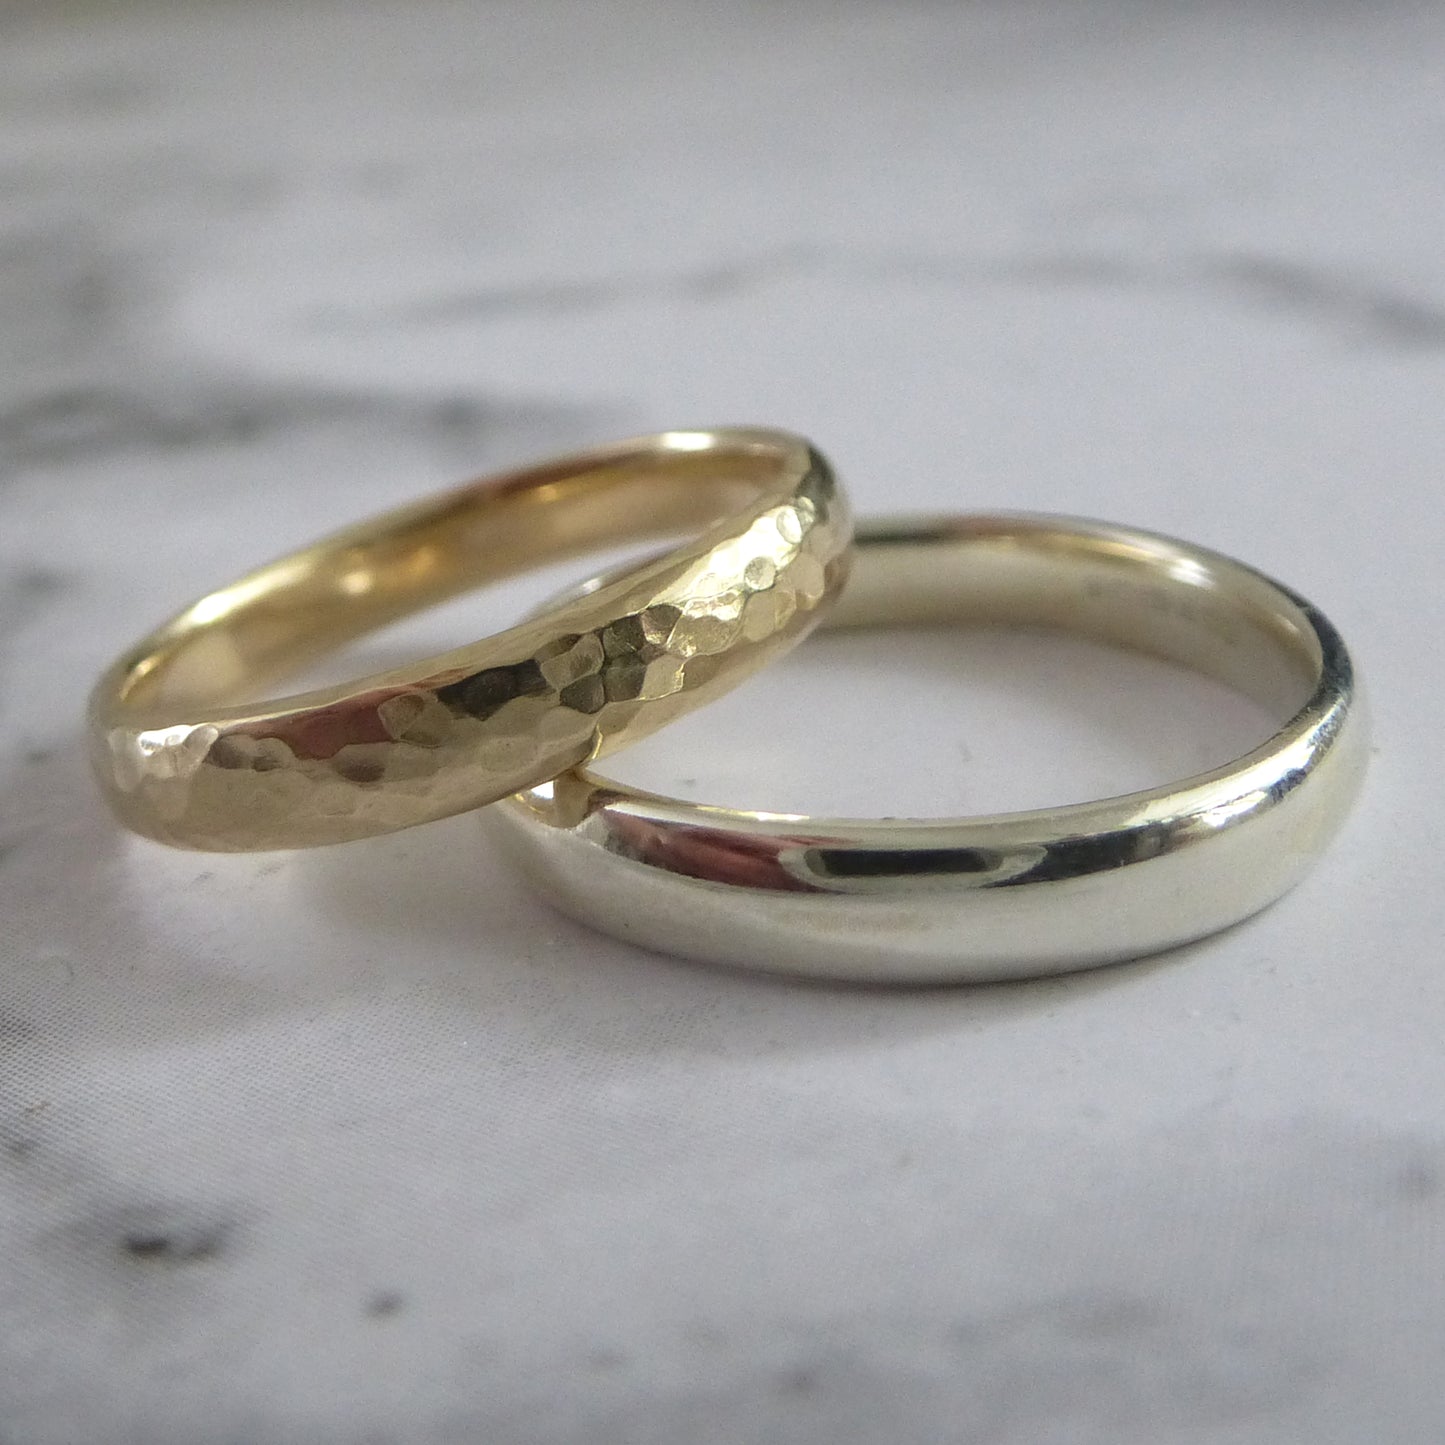 A pair of handmade wedding bands, 9ct yellow gold hammered and 9ct white gold smooth